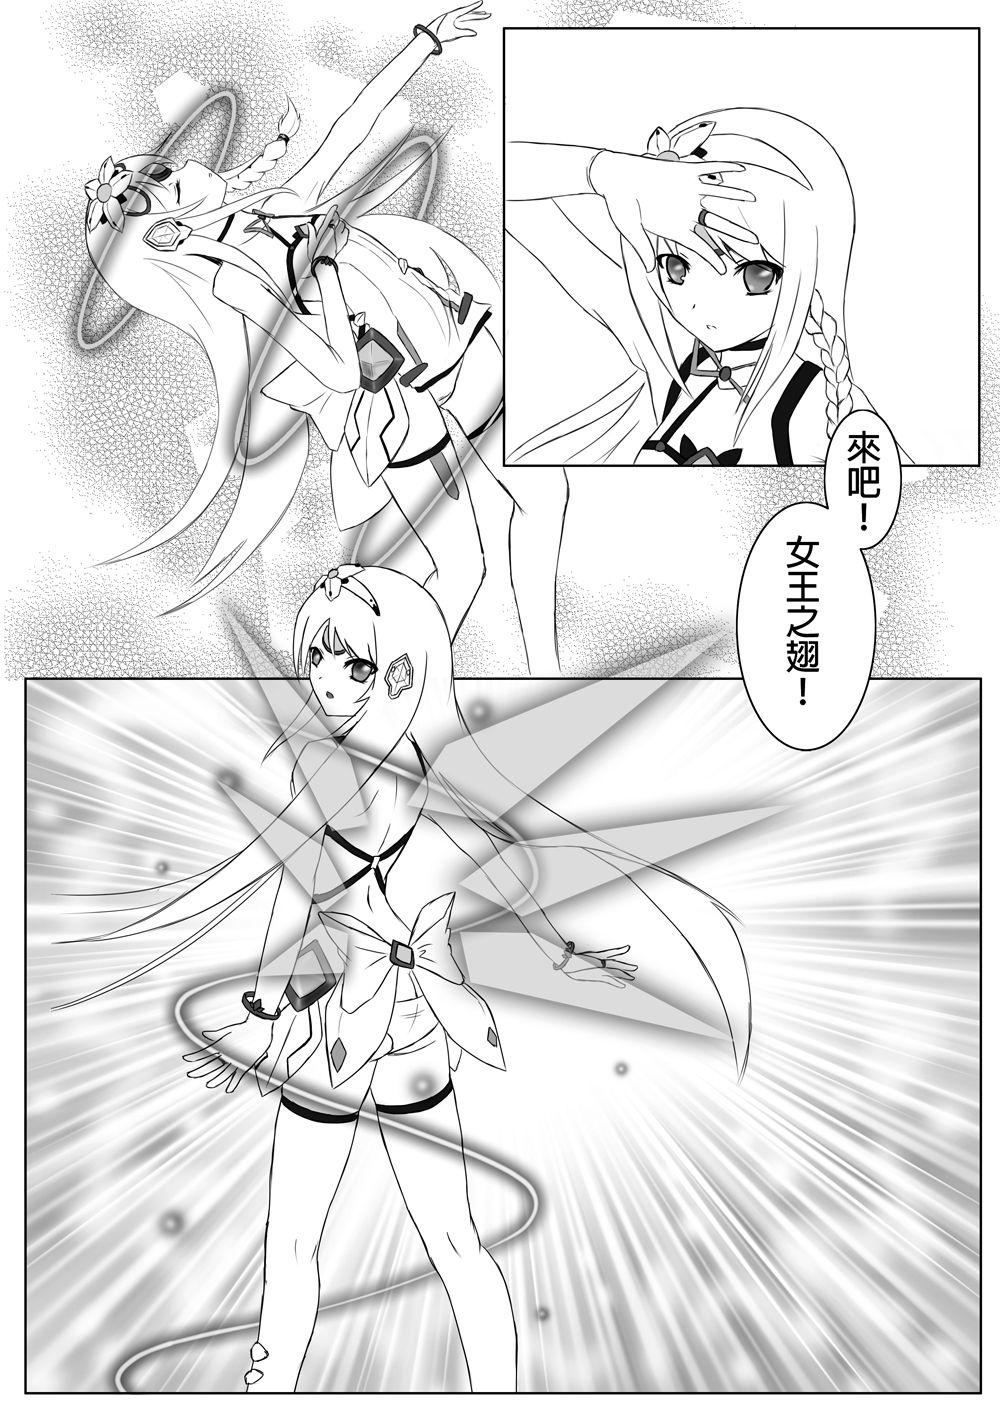 Exposed 人間遊戯 - Elsword Arabe - Page 4